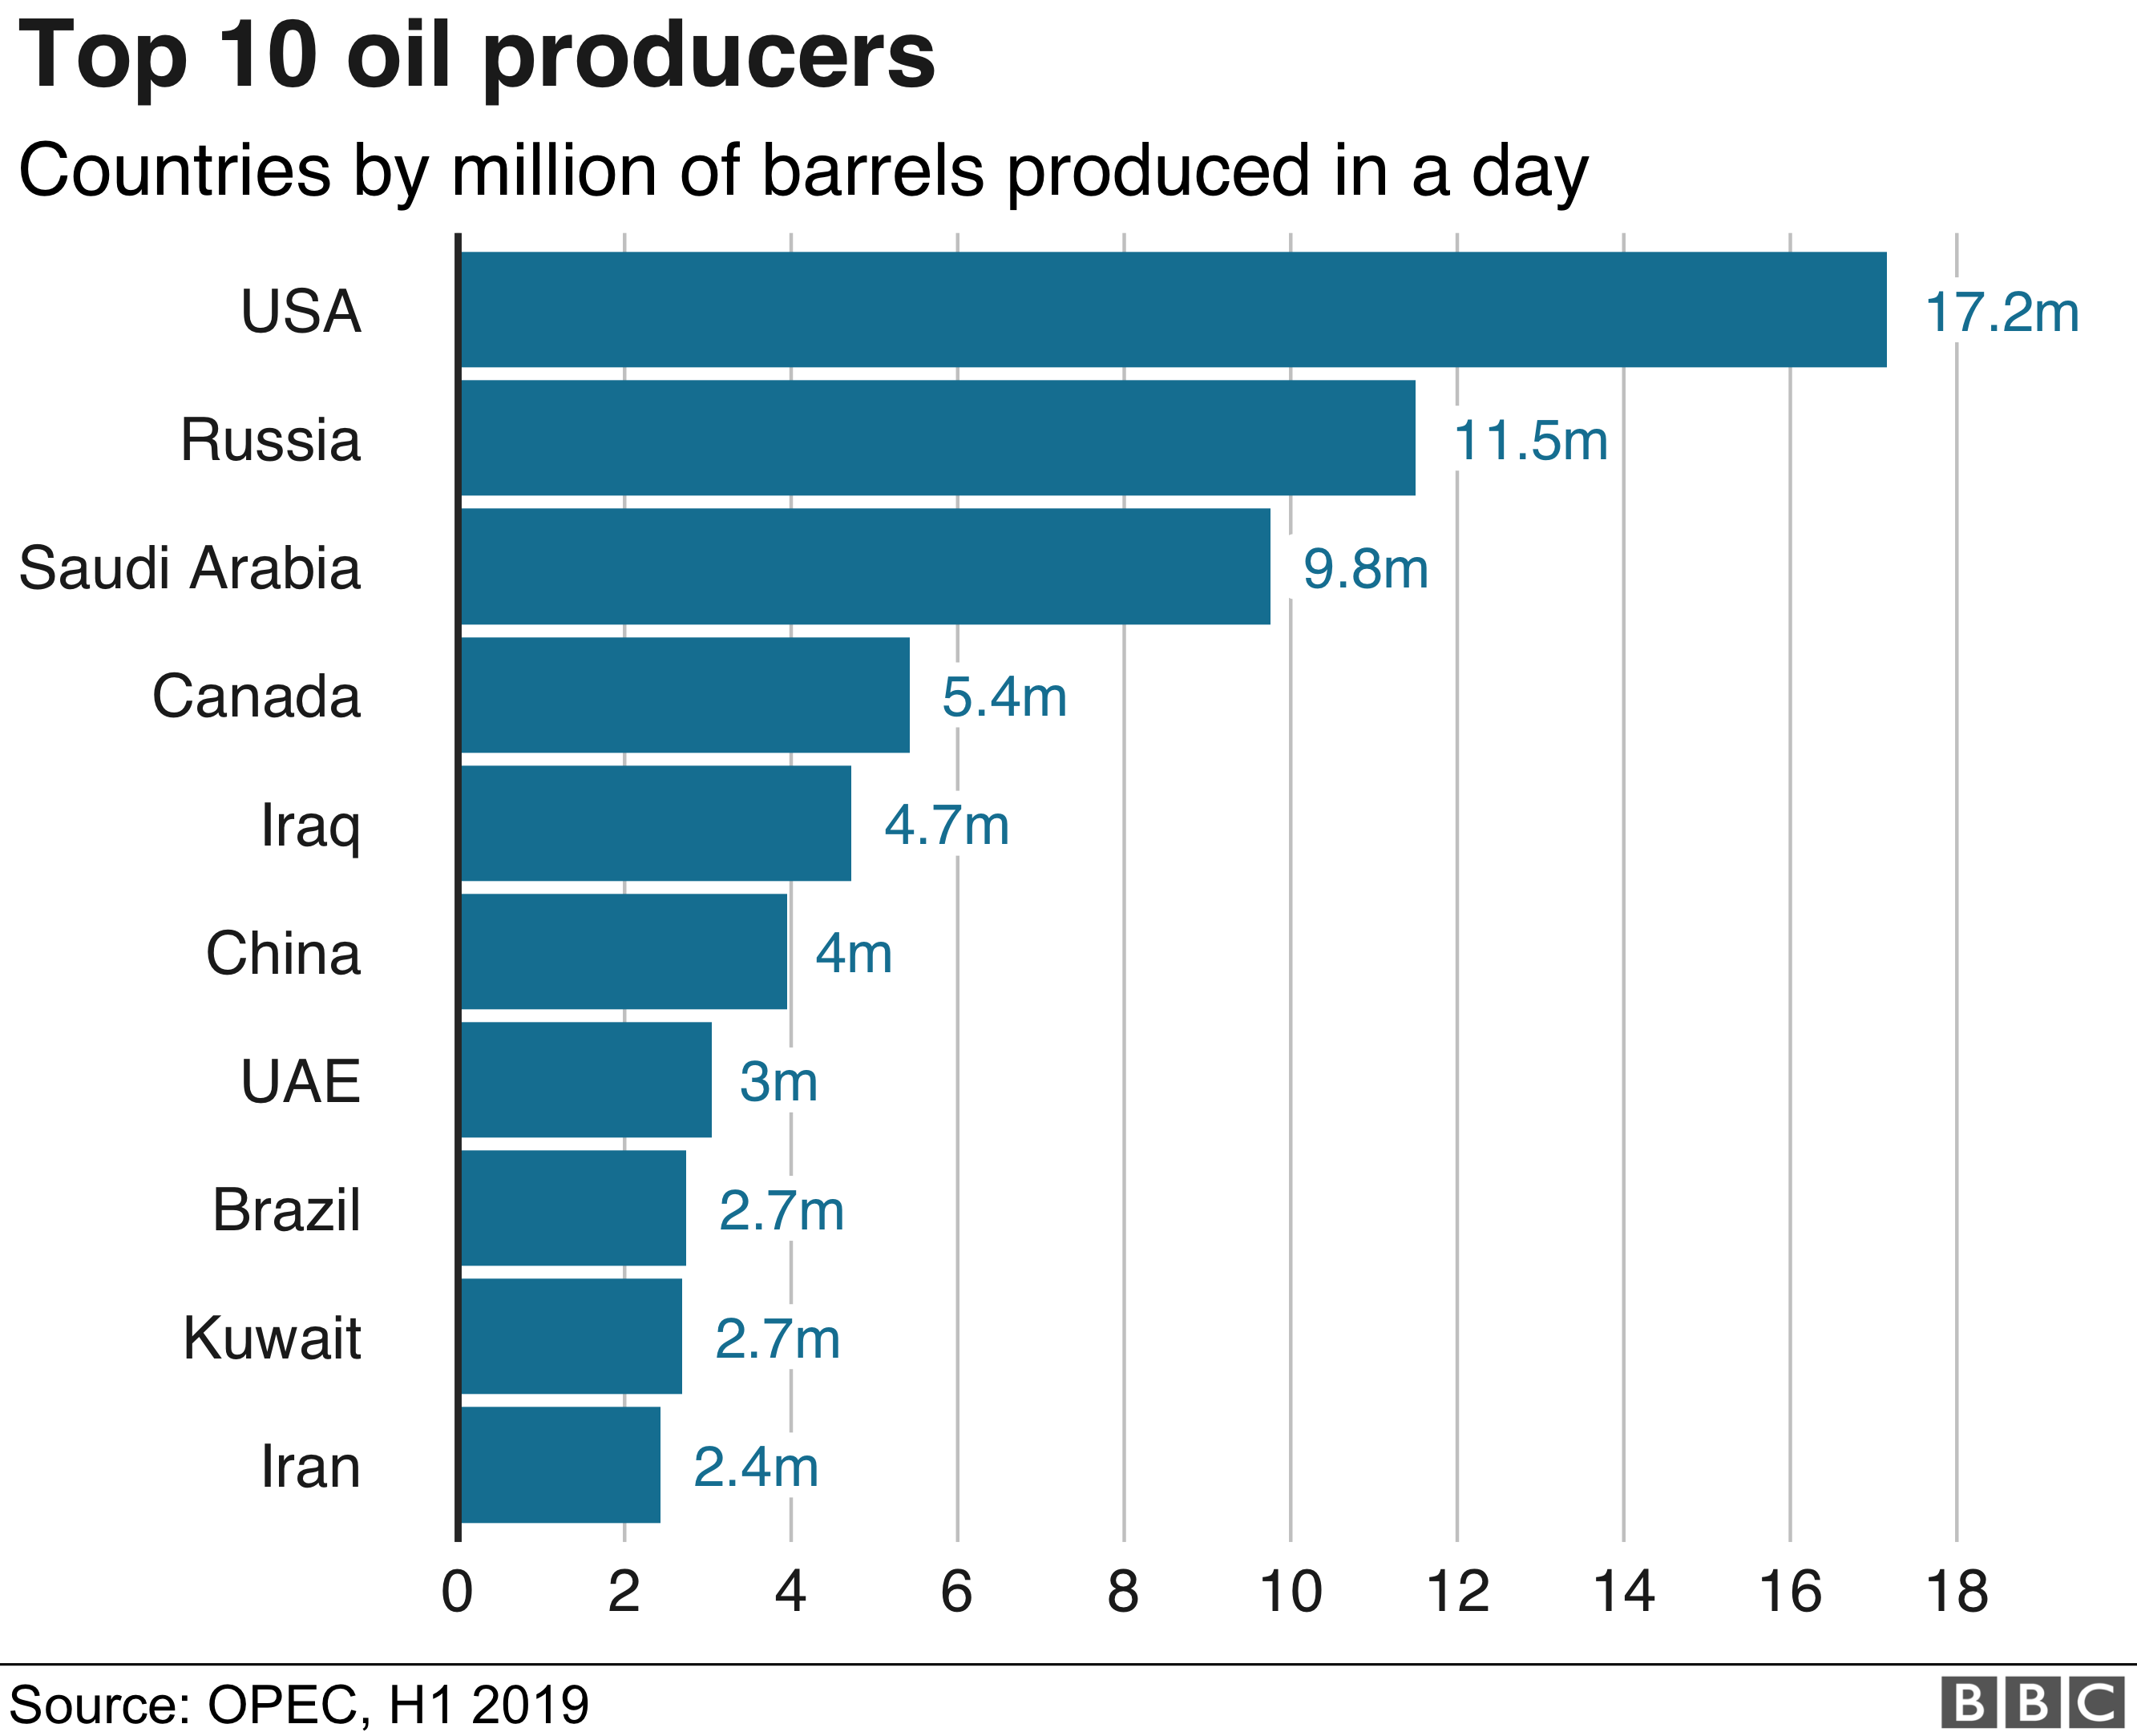 oil production by country 2022